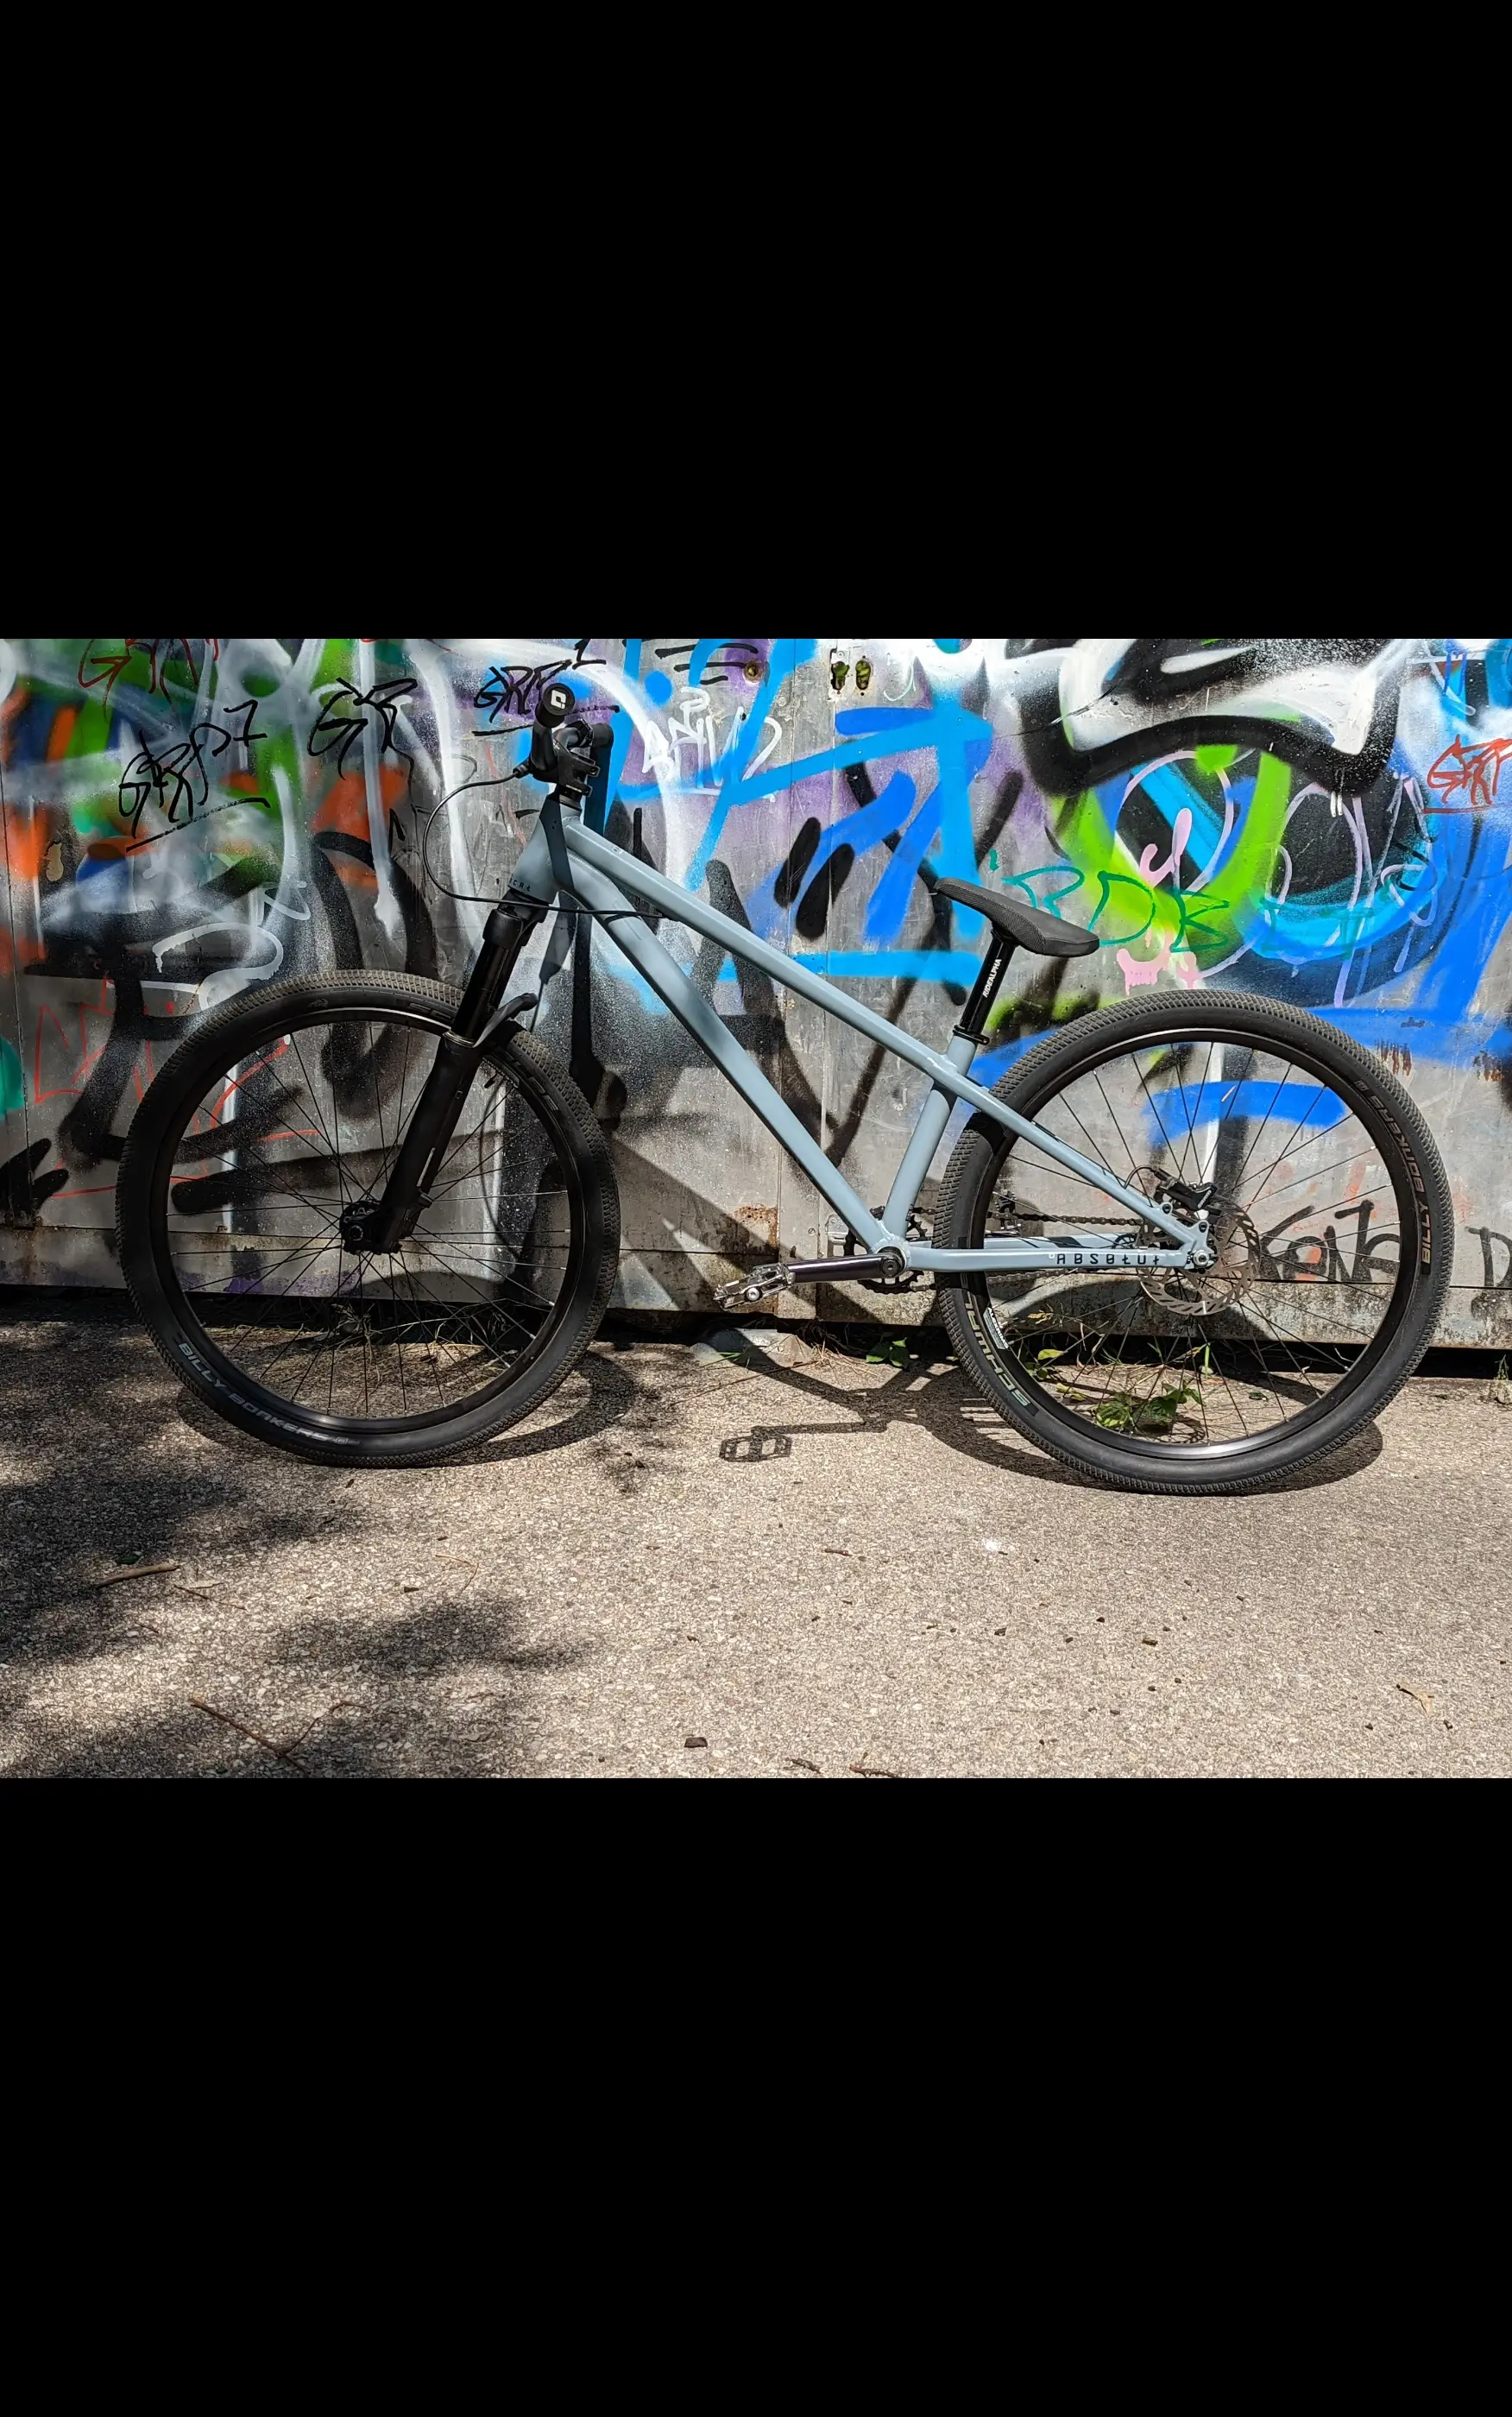 Commencal ABSOLUT MAXXIS used in LG buycycle